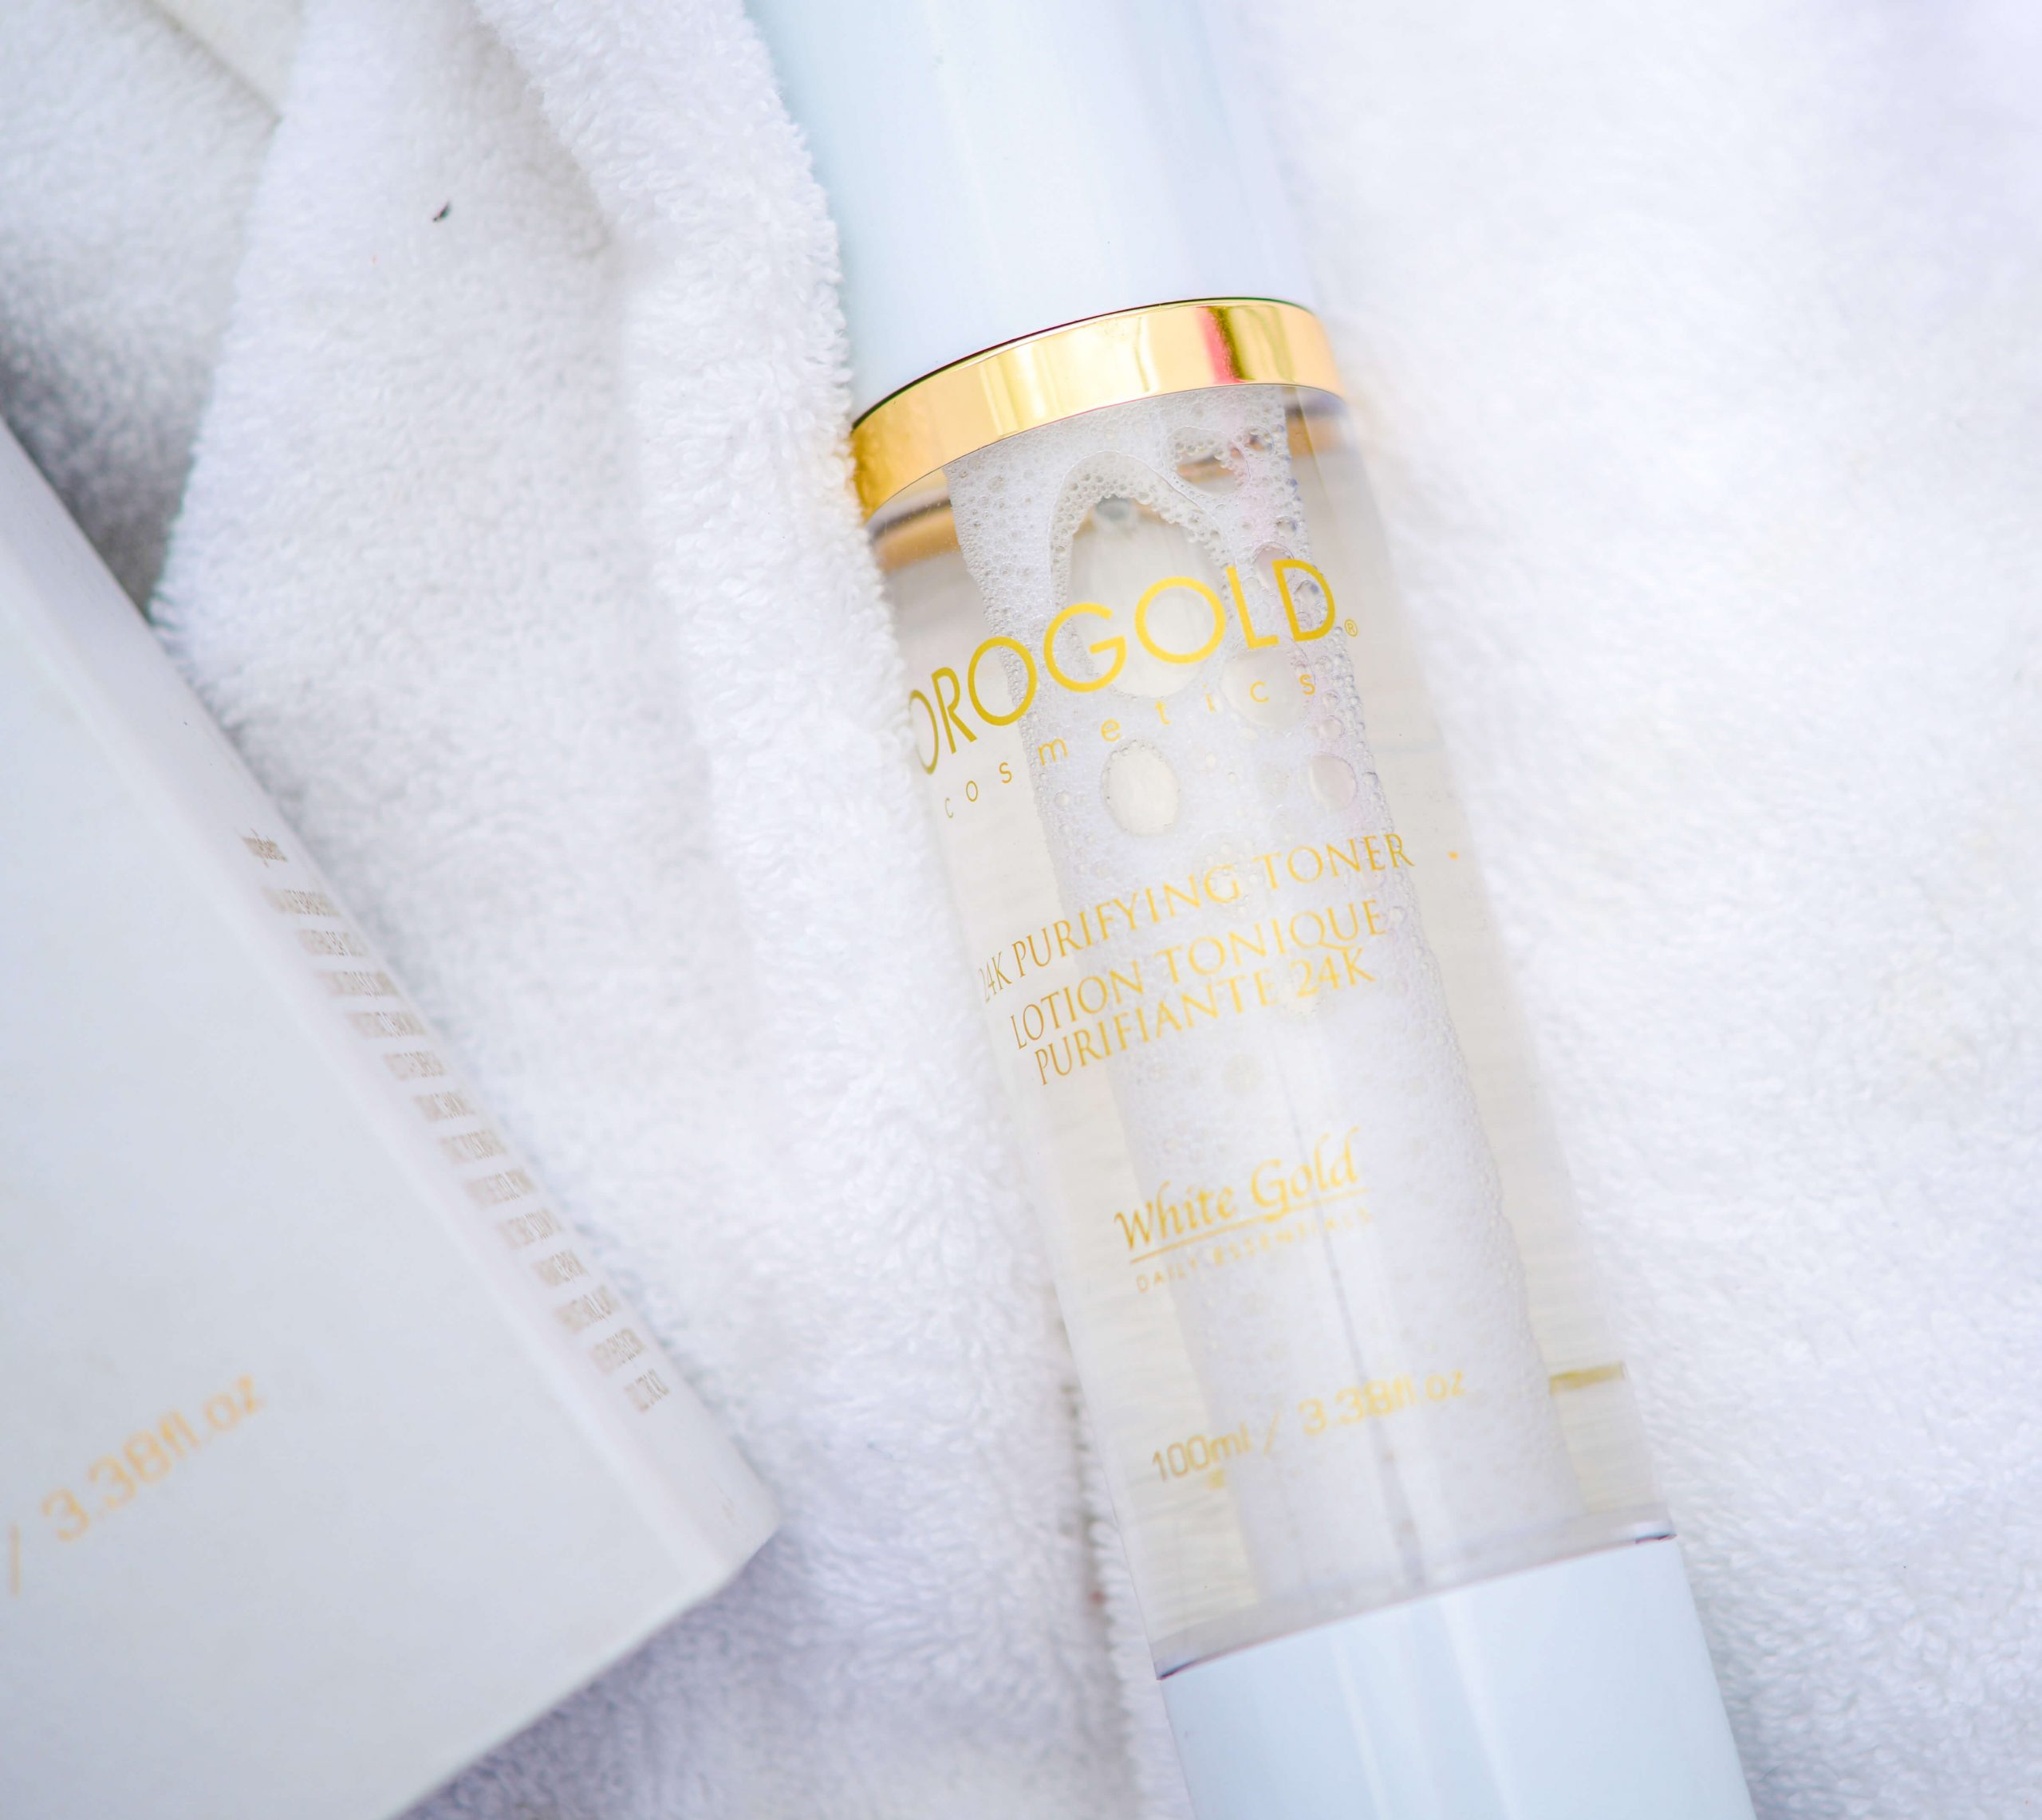 24K toner is a great way to treat yourself